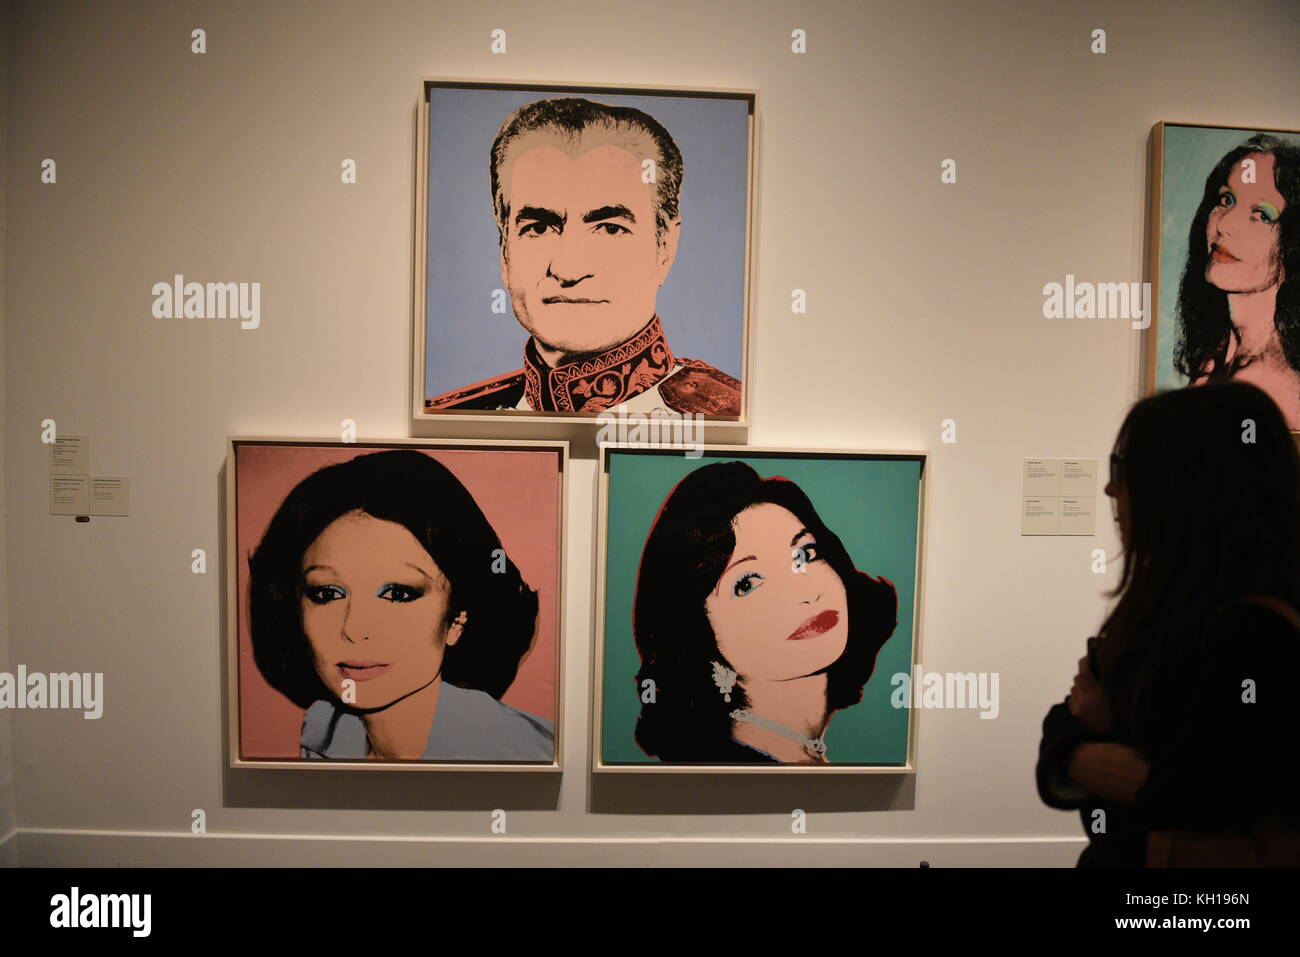 Barcelona, Spain. 11th Nov, 2017. A woman views an exhibition titled 'Andy Warhol: Mechanical Art' at Caixaforum art gallery in Barcelona. Credit: Jorge Sanz/Pacific Press/Alamy Live News Stock Photo